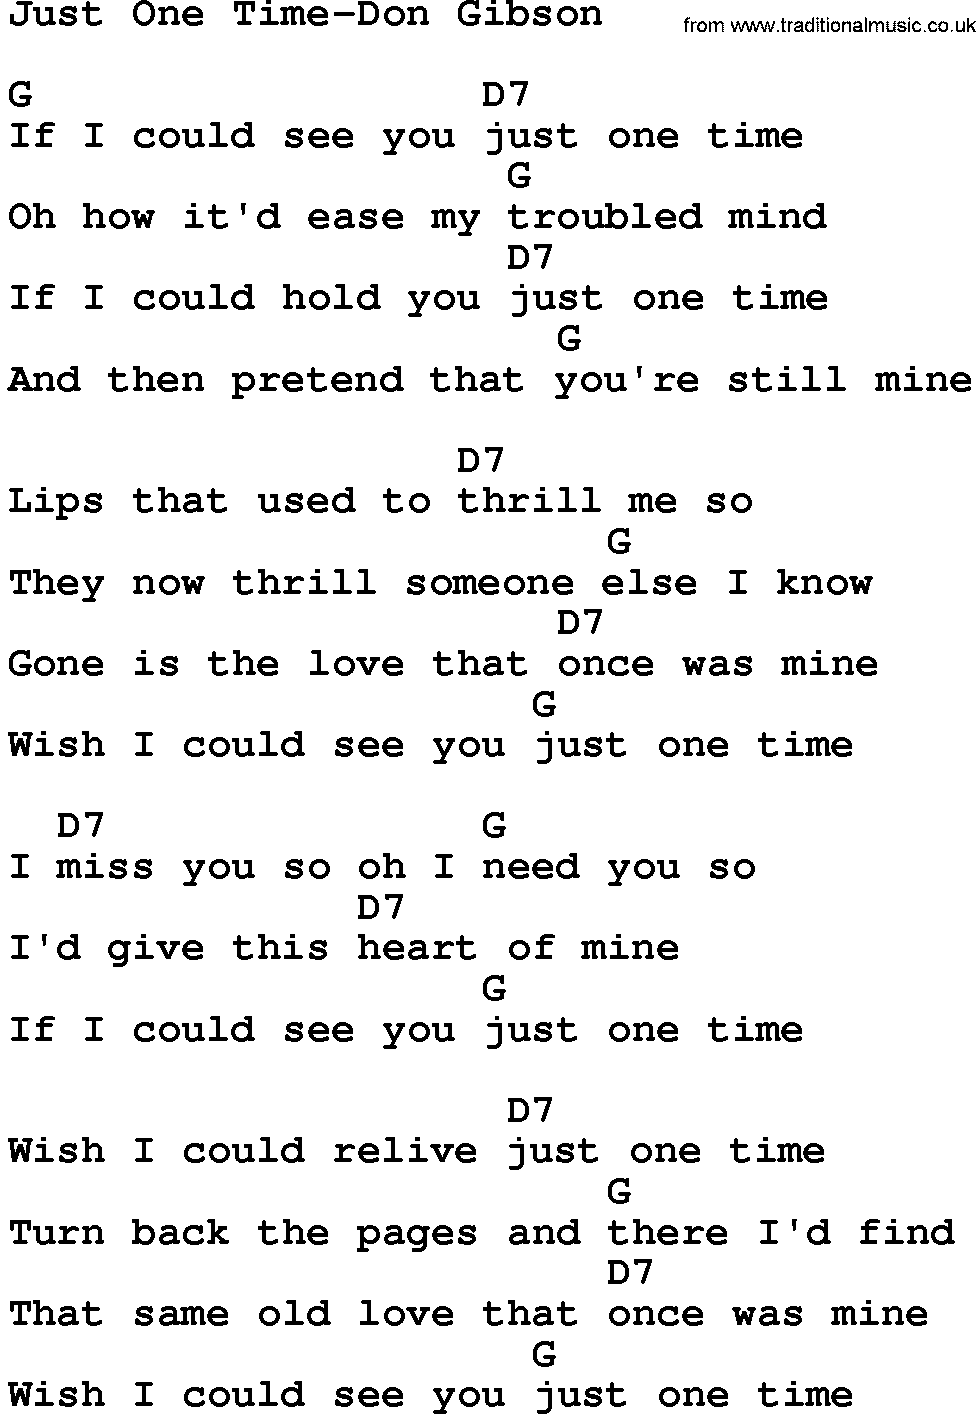 Country music song: Just One Time-Don Gibson lyrics and chords